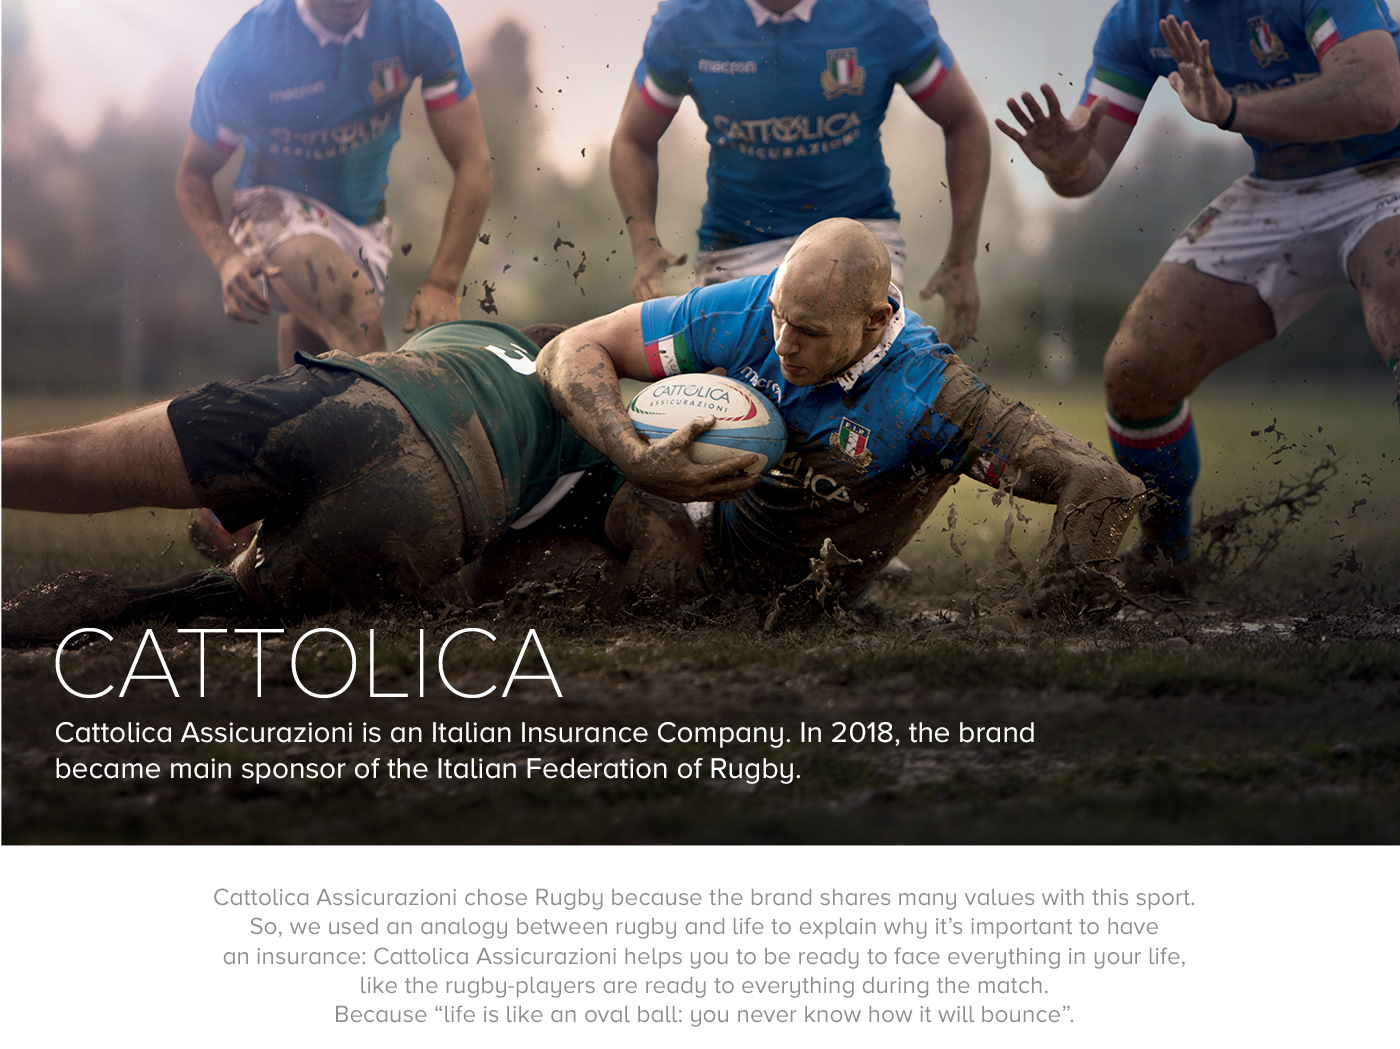 Spot commercial art direction  Rugby Film   ADV Advertising  sport